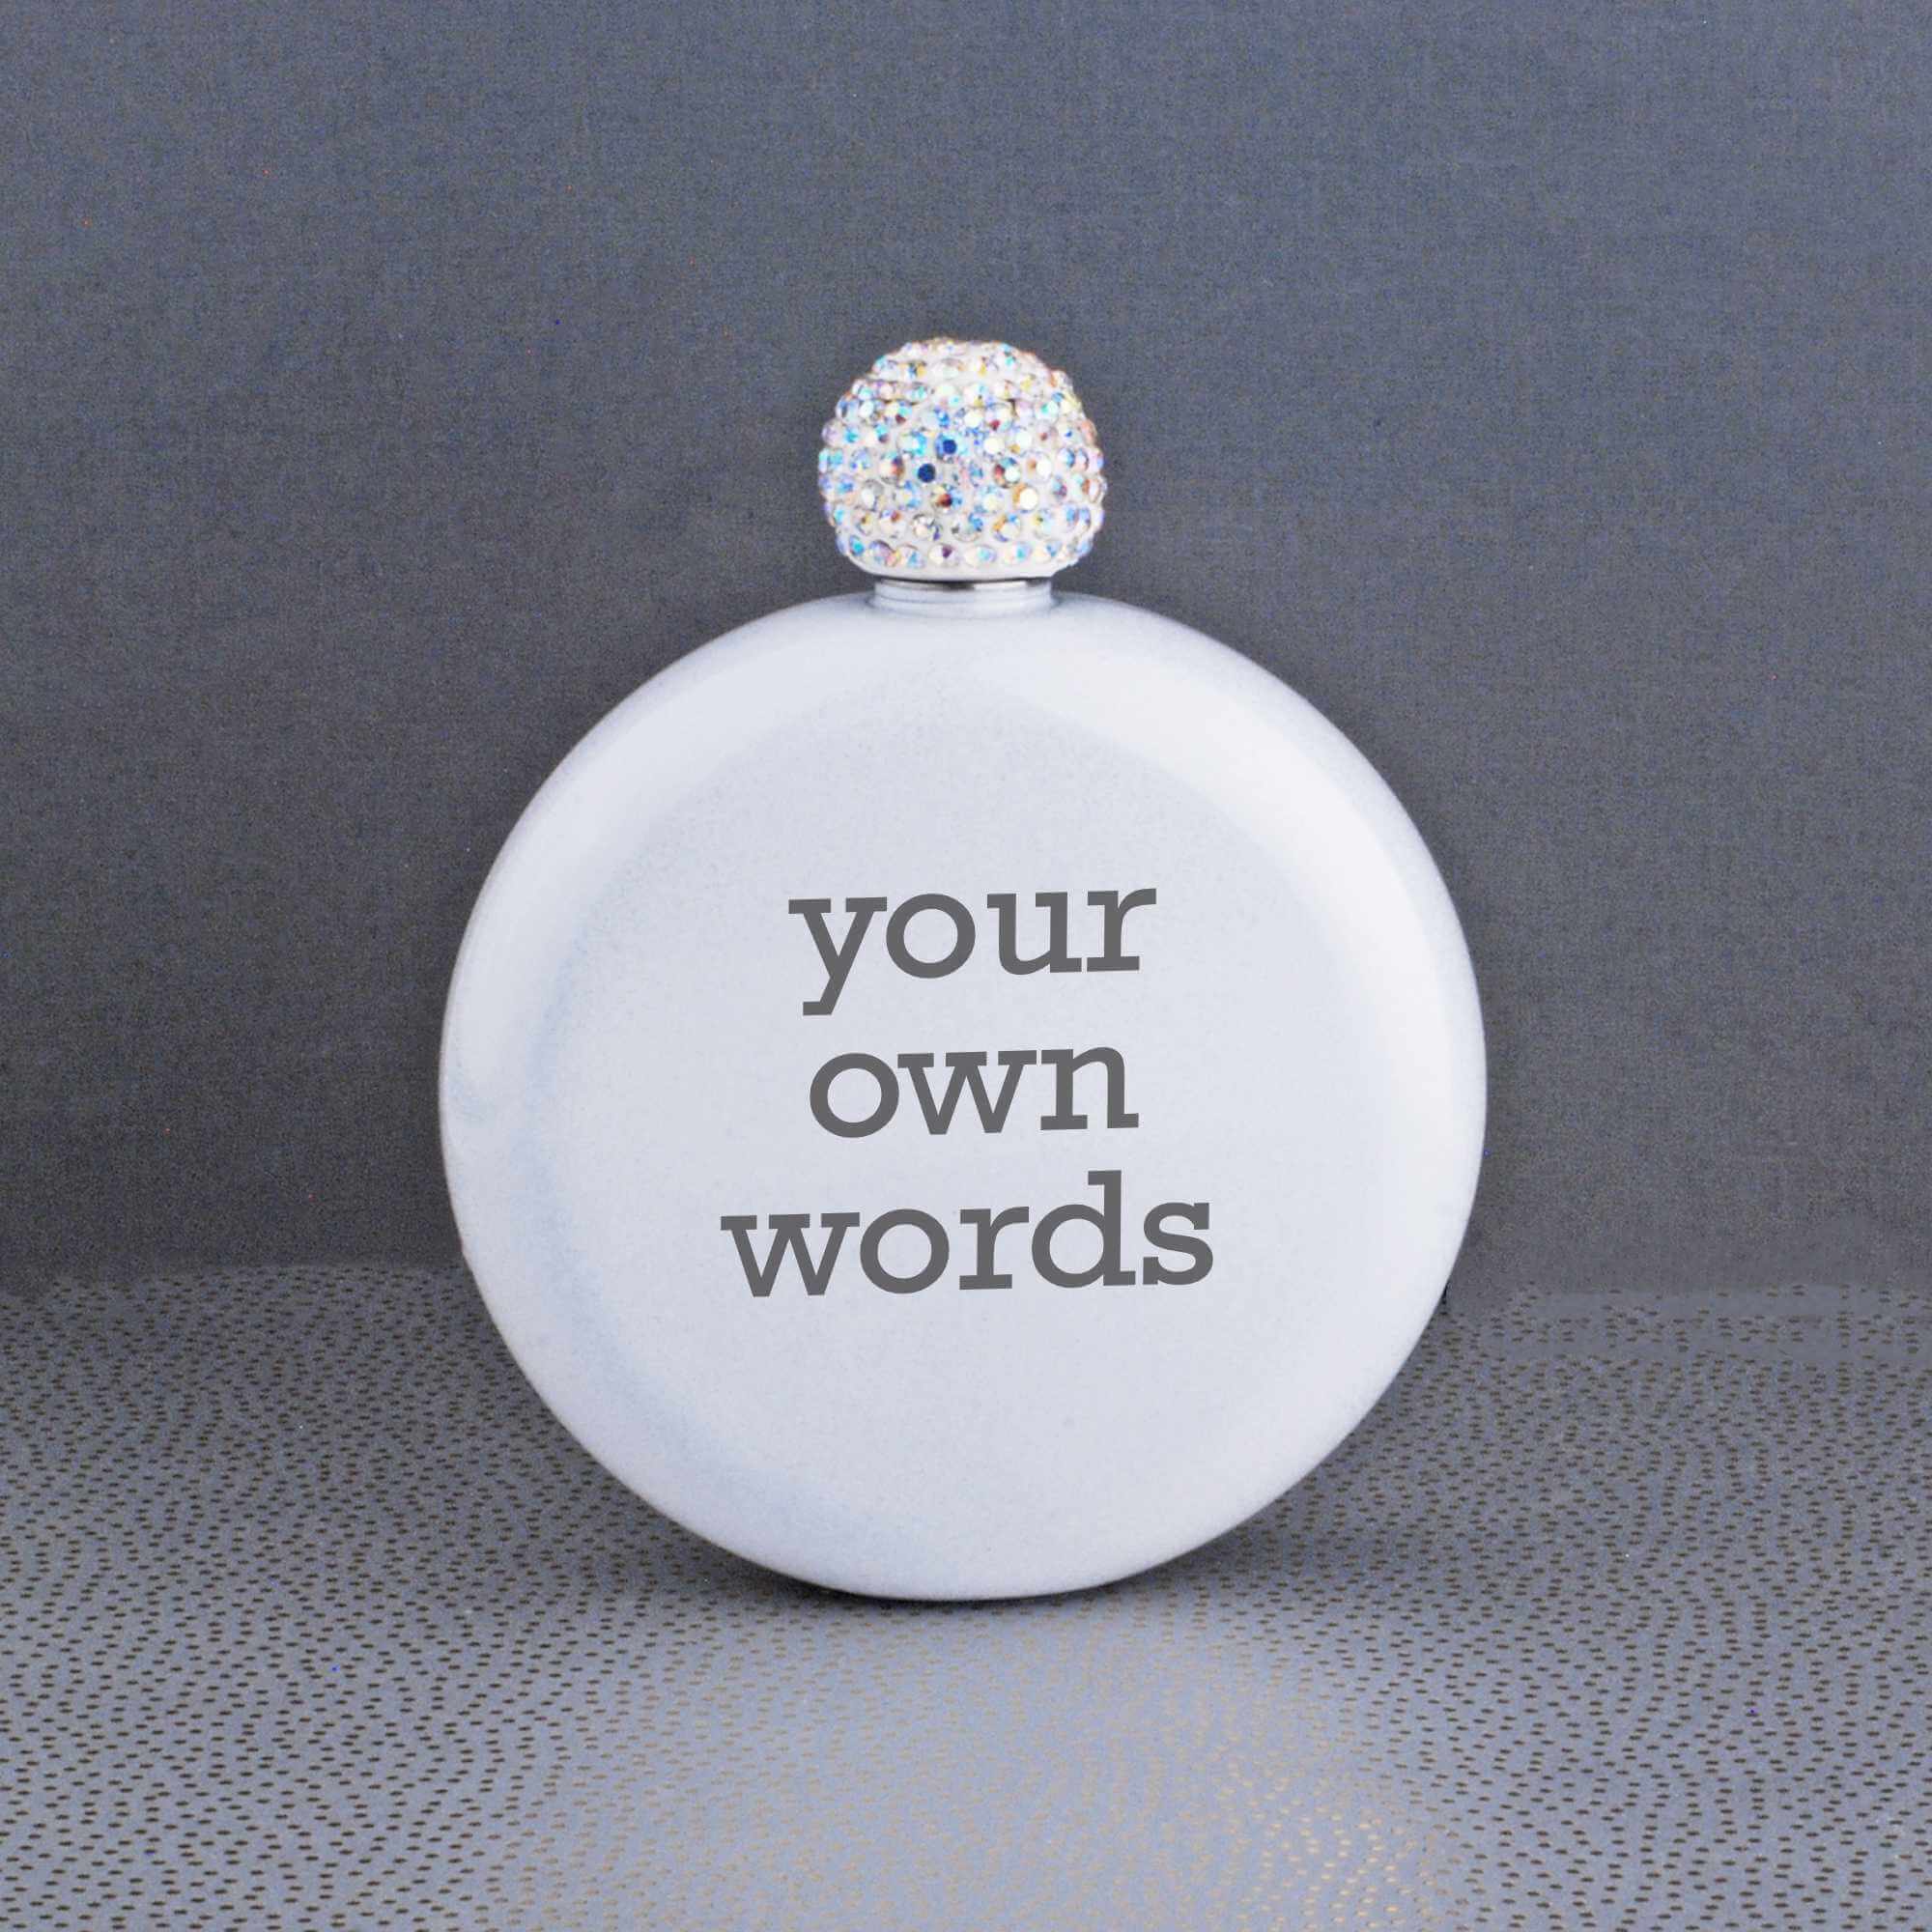 Round Glitter Flask Engraved with Your Own Words